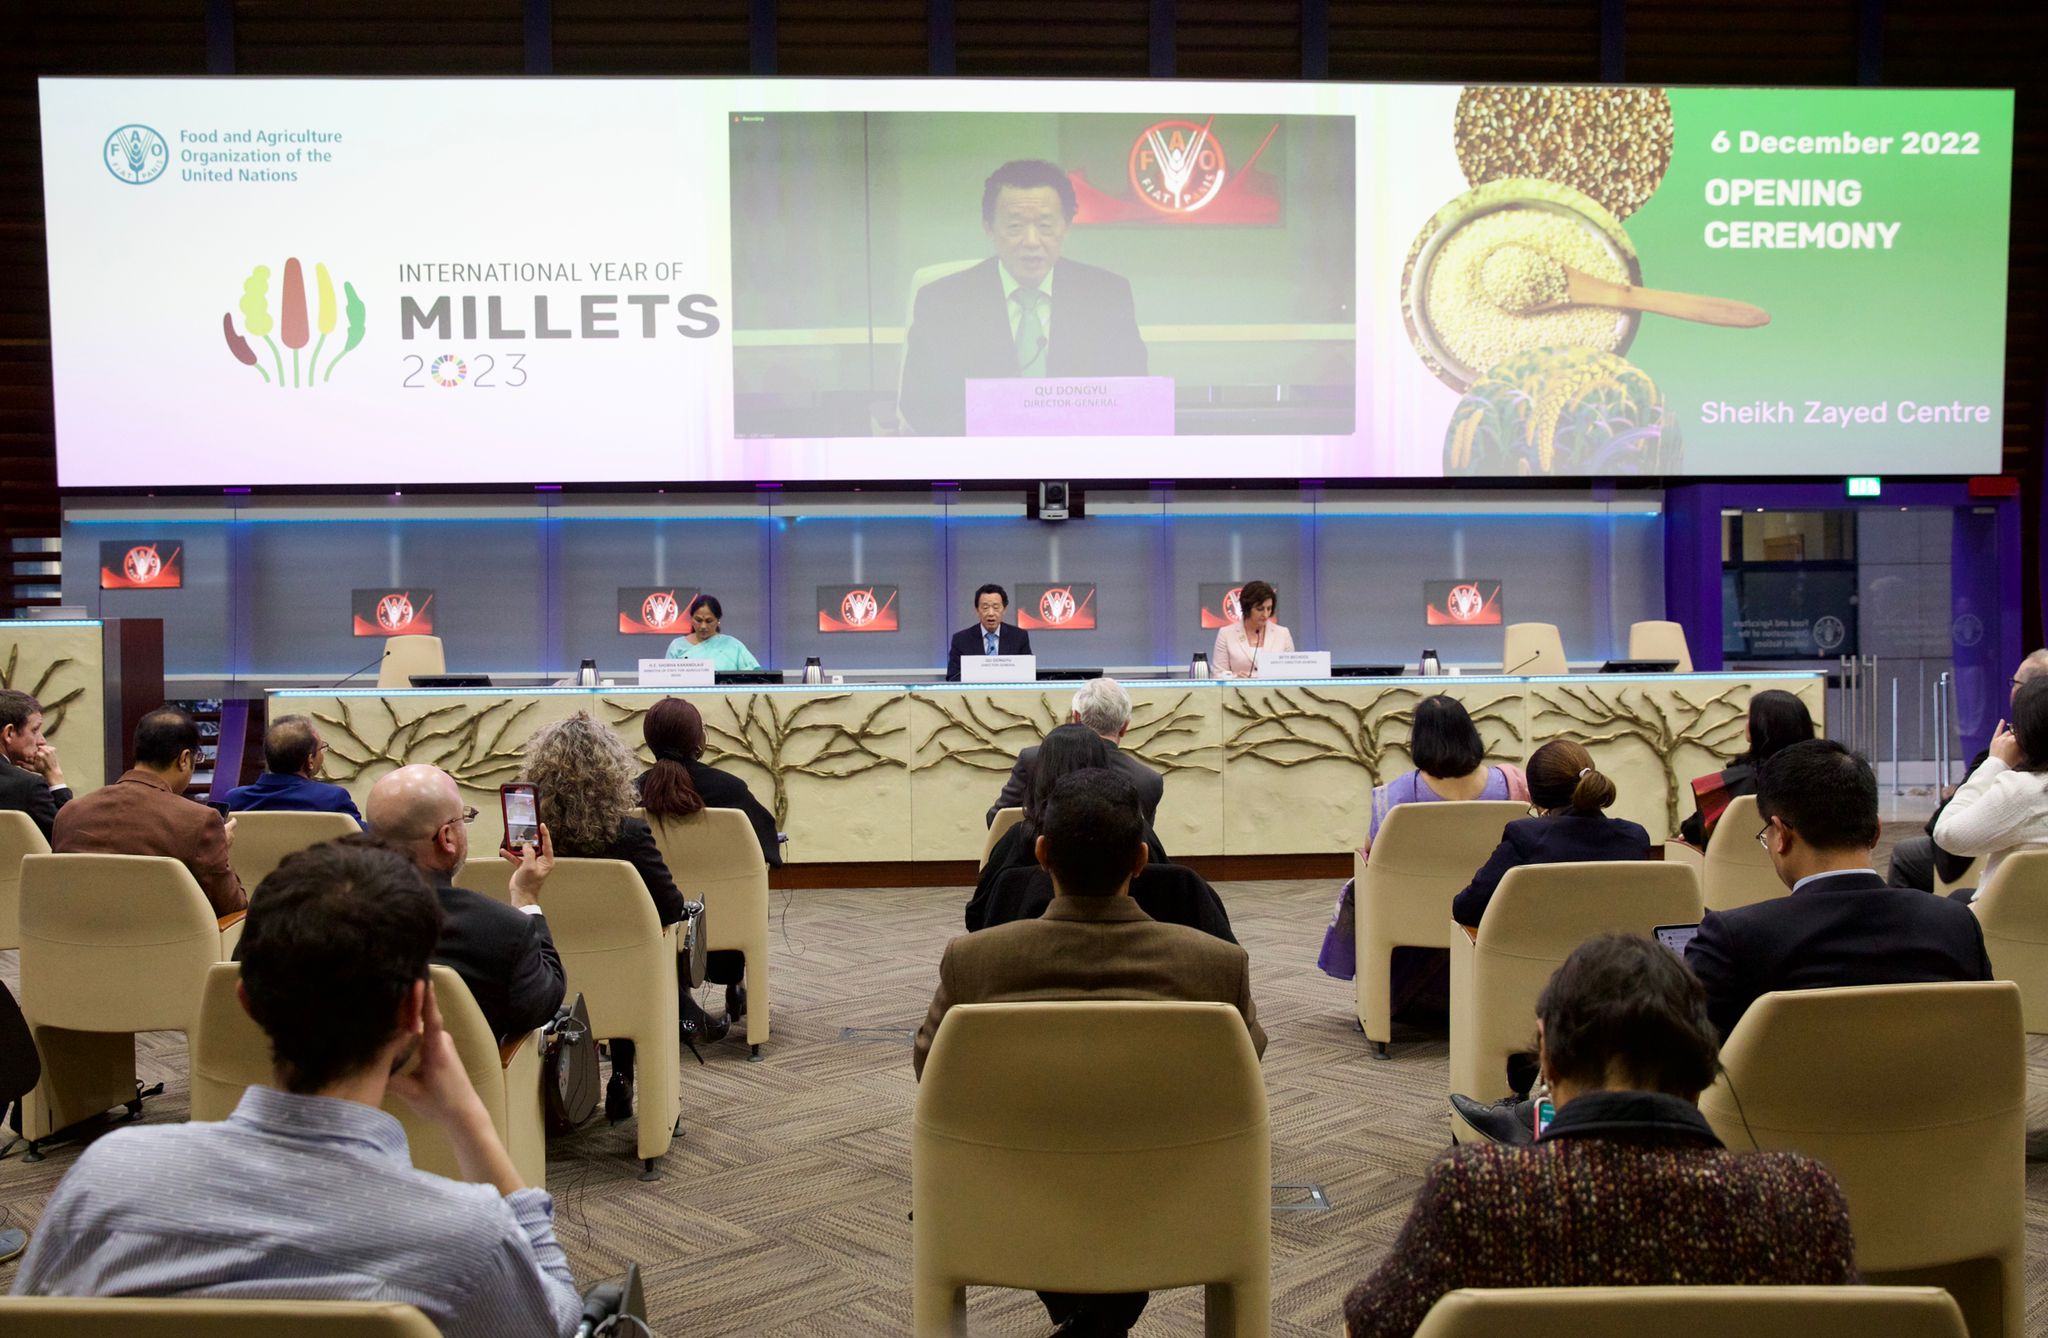 Opening-ceremony-International-Year-of-Millets-2023.jpeg